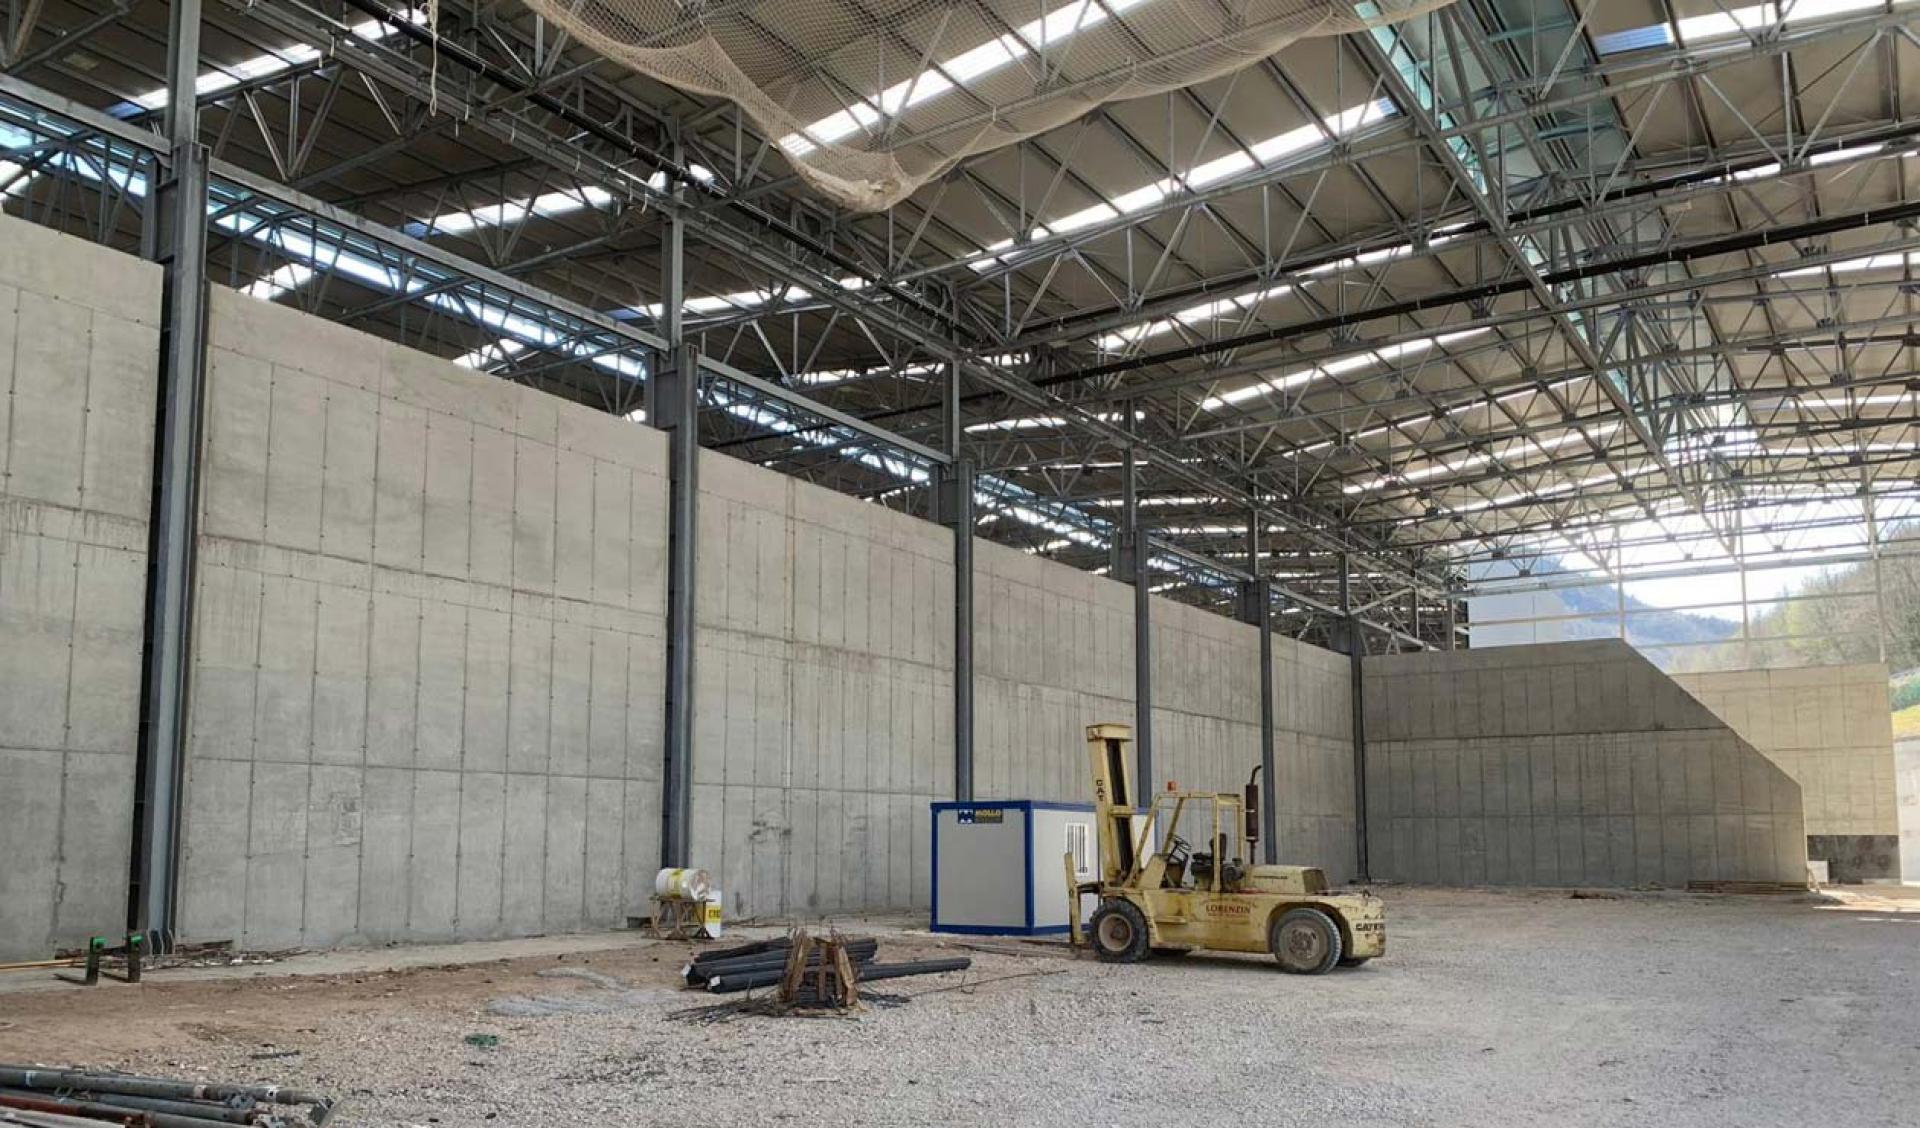 Construction of a new industrial building